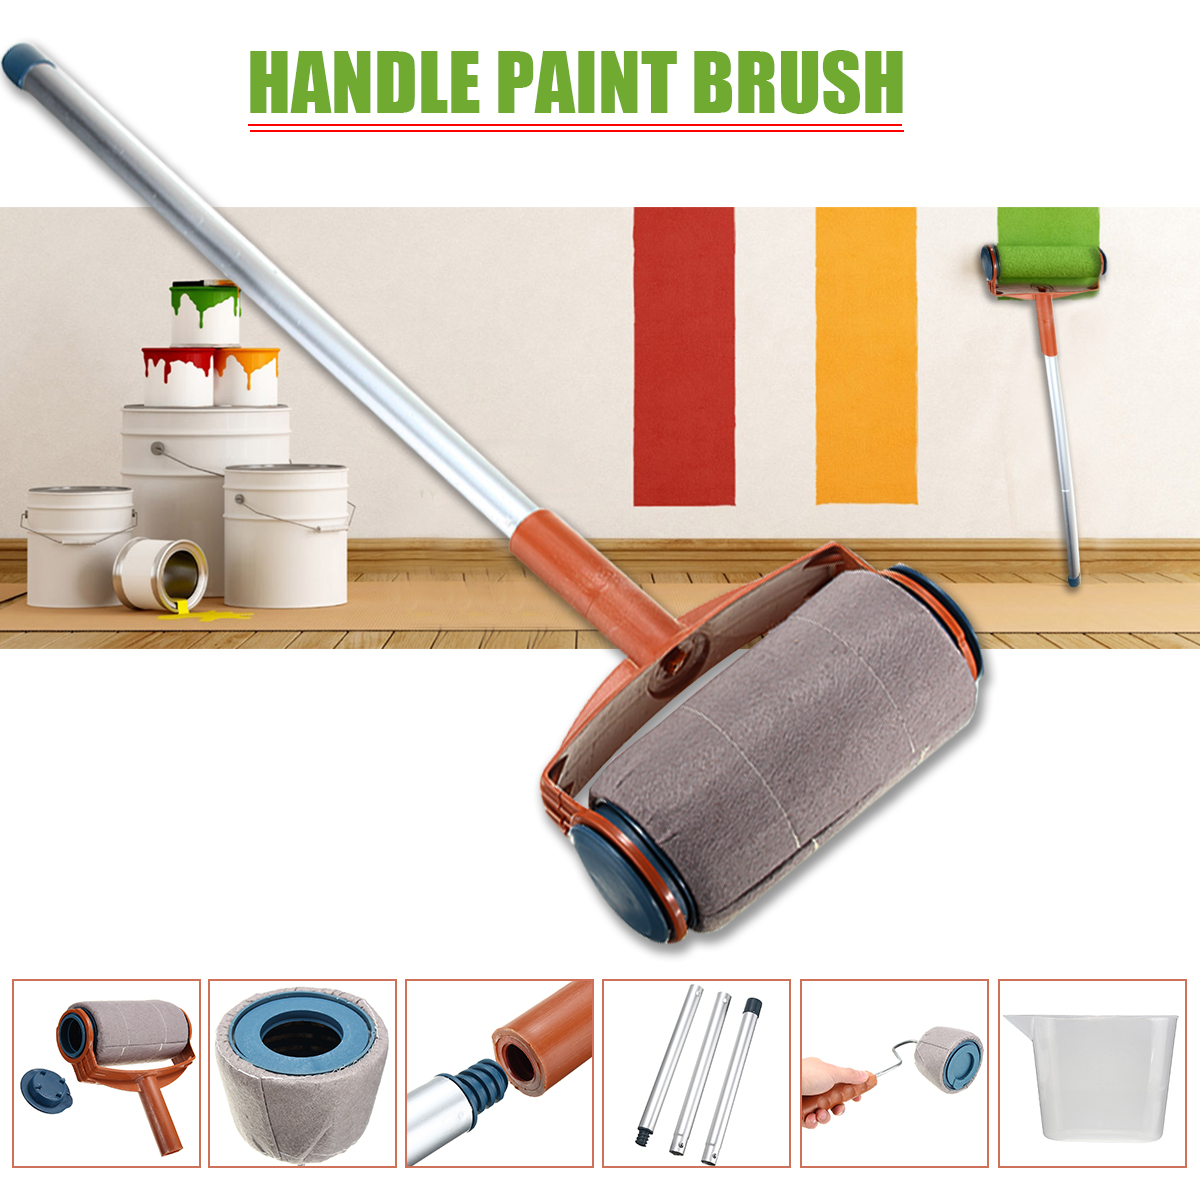 6-PCS-Paint-Roller-Professional-Paintbrush-Flocked-Edger-Easy-Room-Wall-Painting-Tools-1196222-2